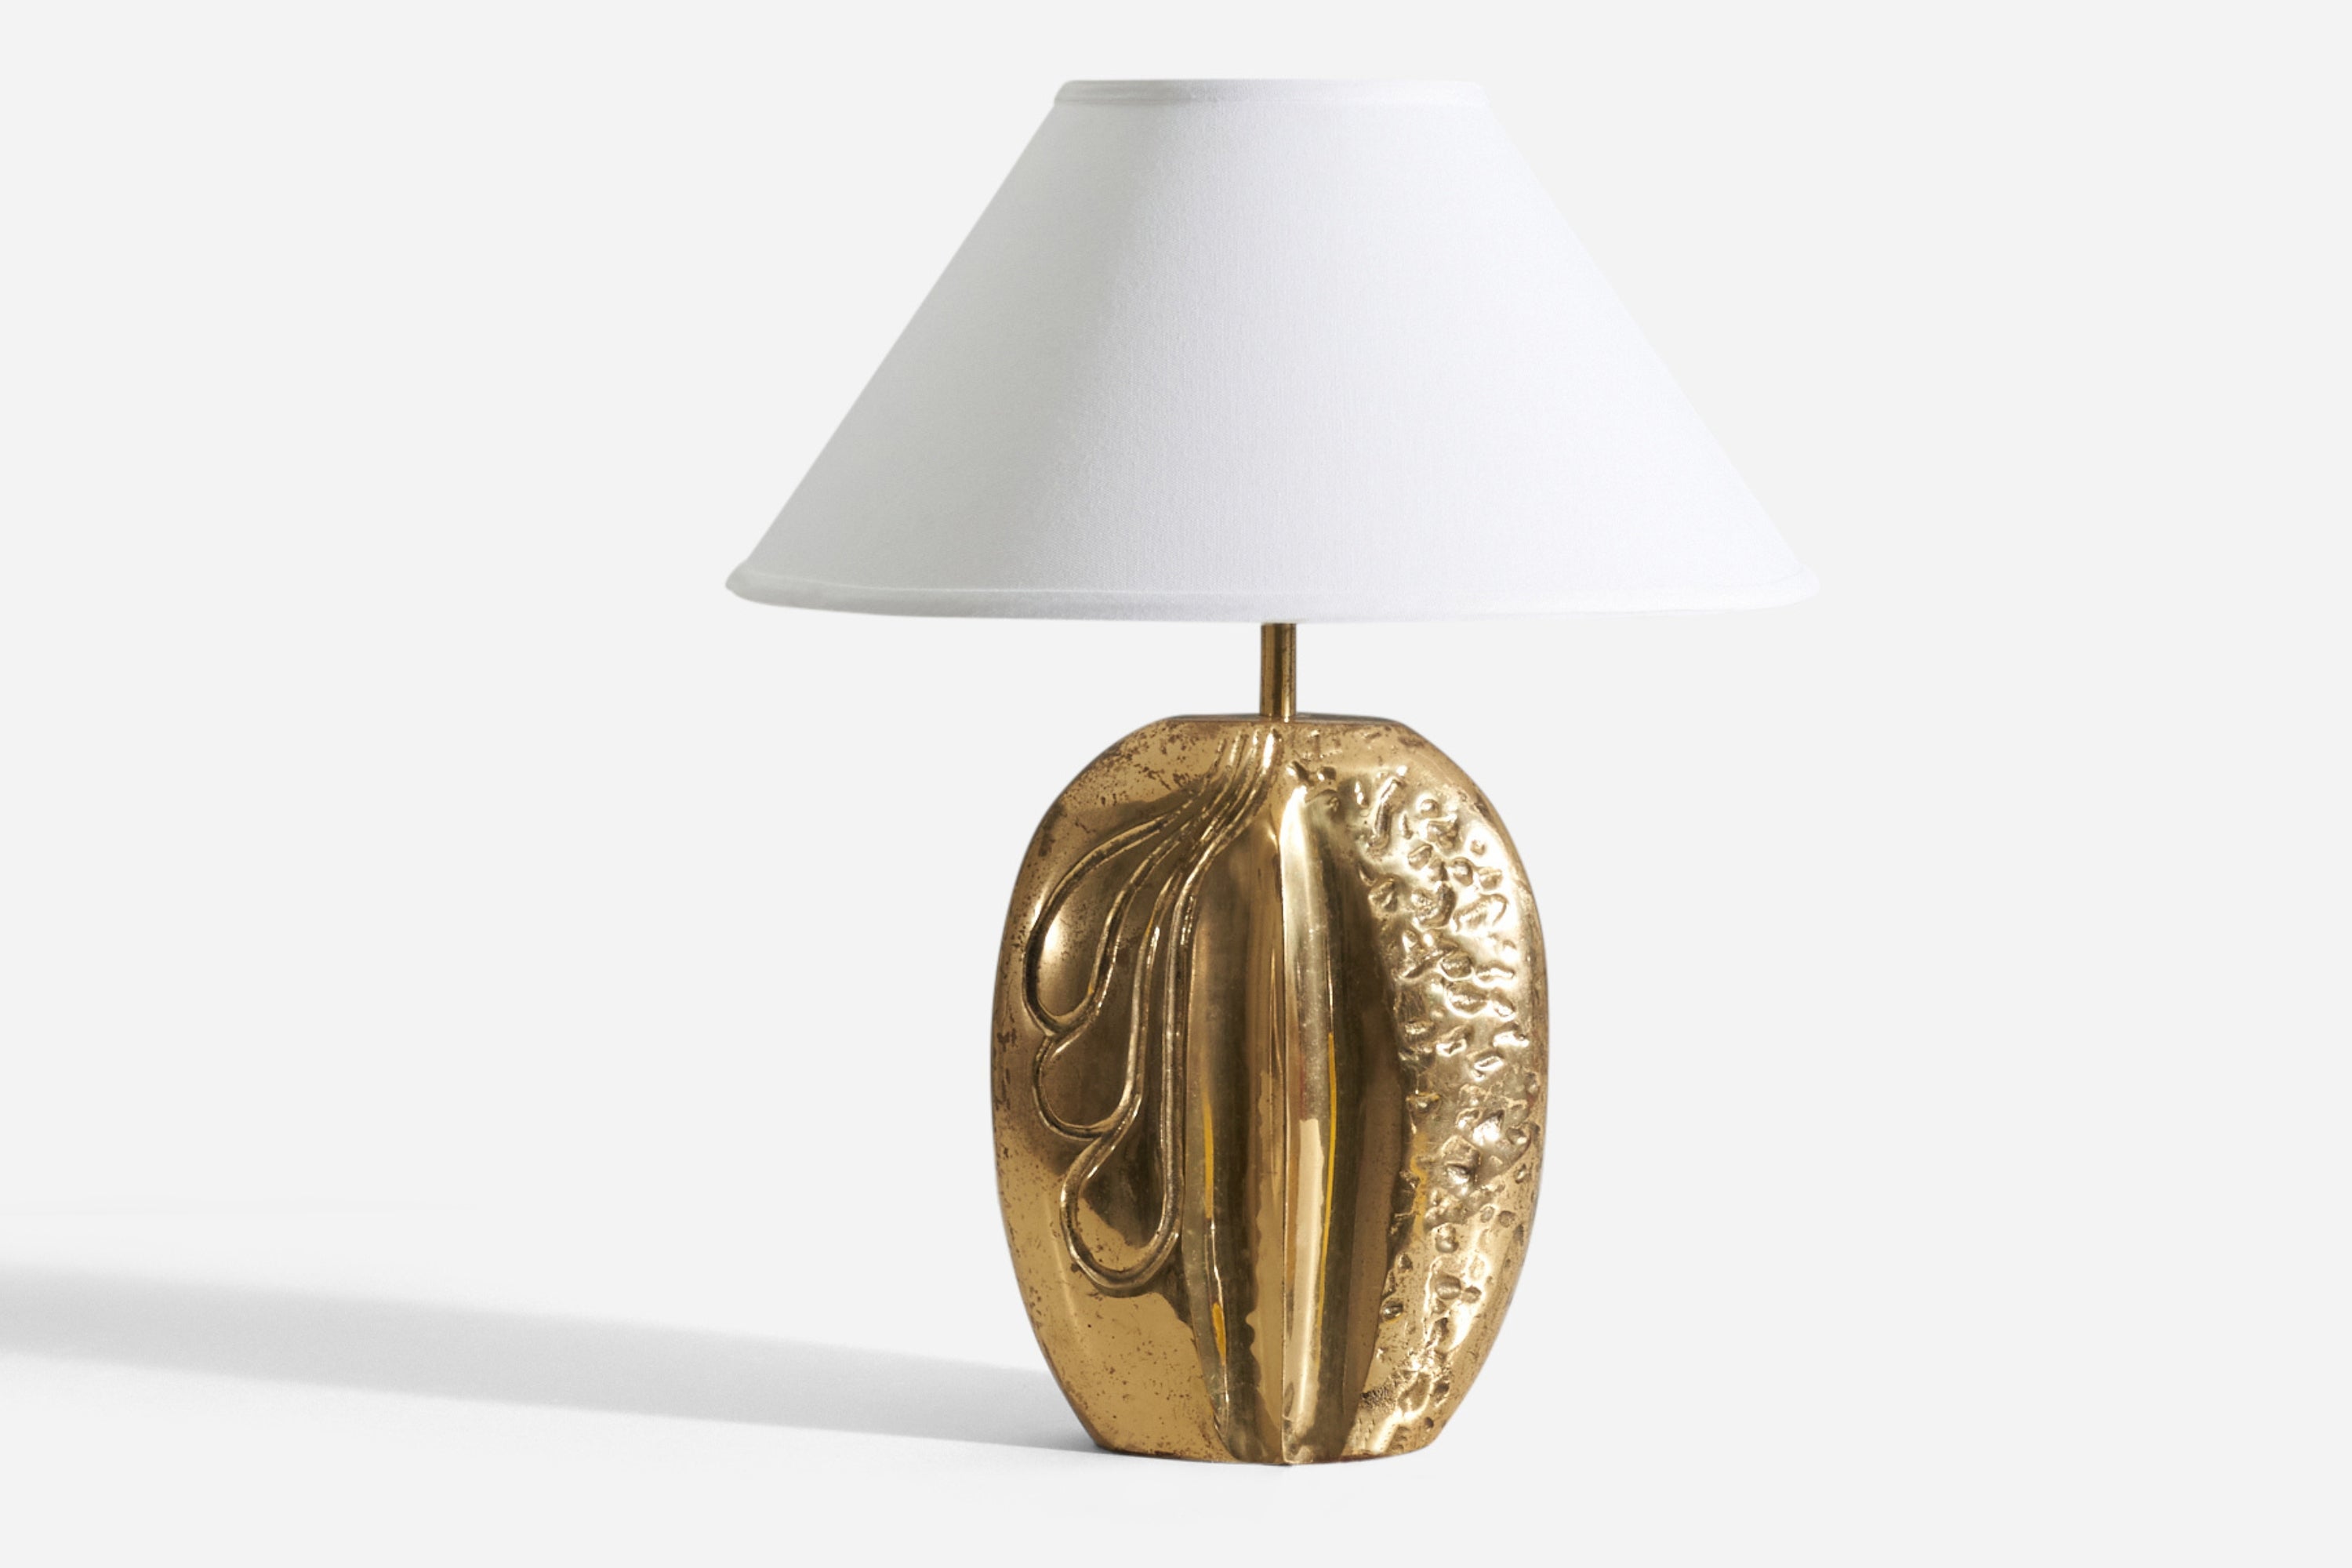 Italian, Modernist Table Lamp, Gold-Plated Brass, Fabric, Italy, 1960s For Sale